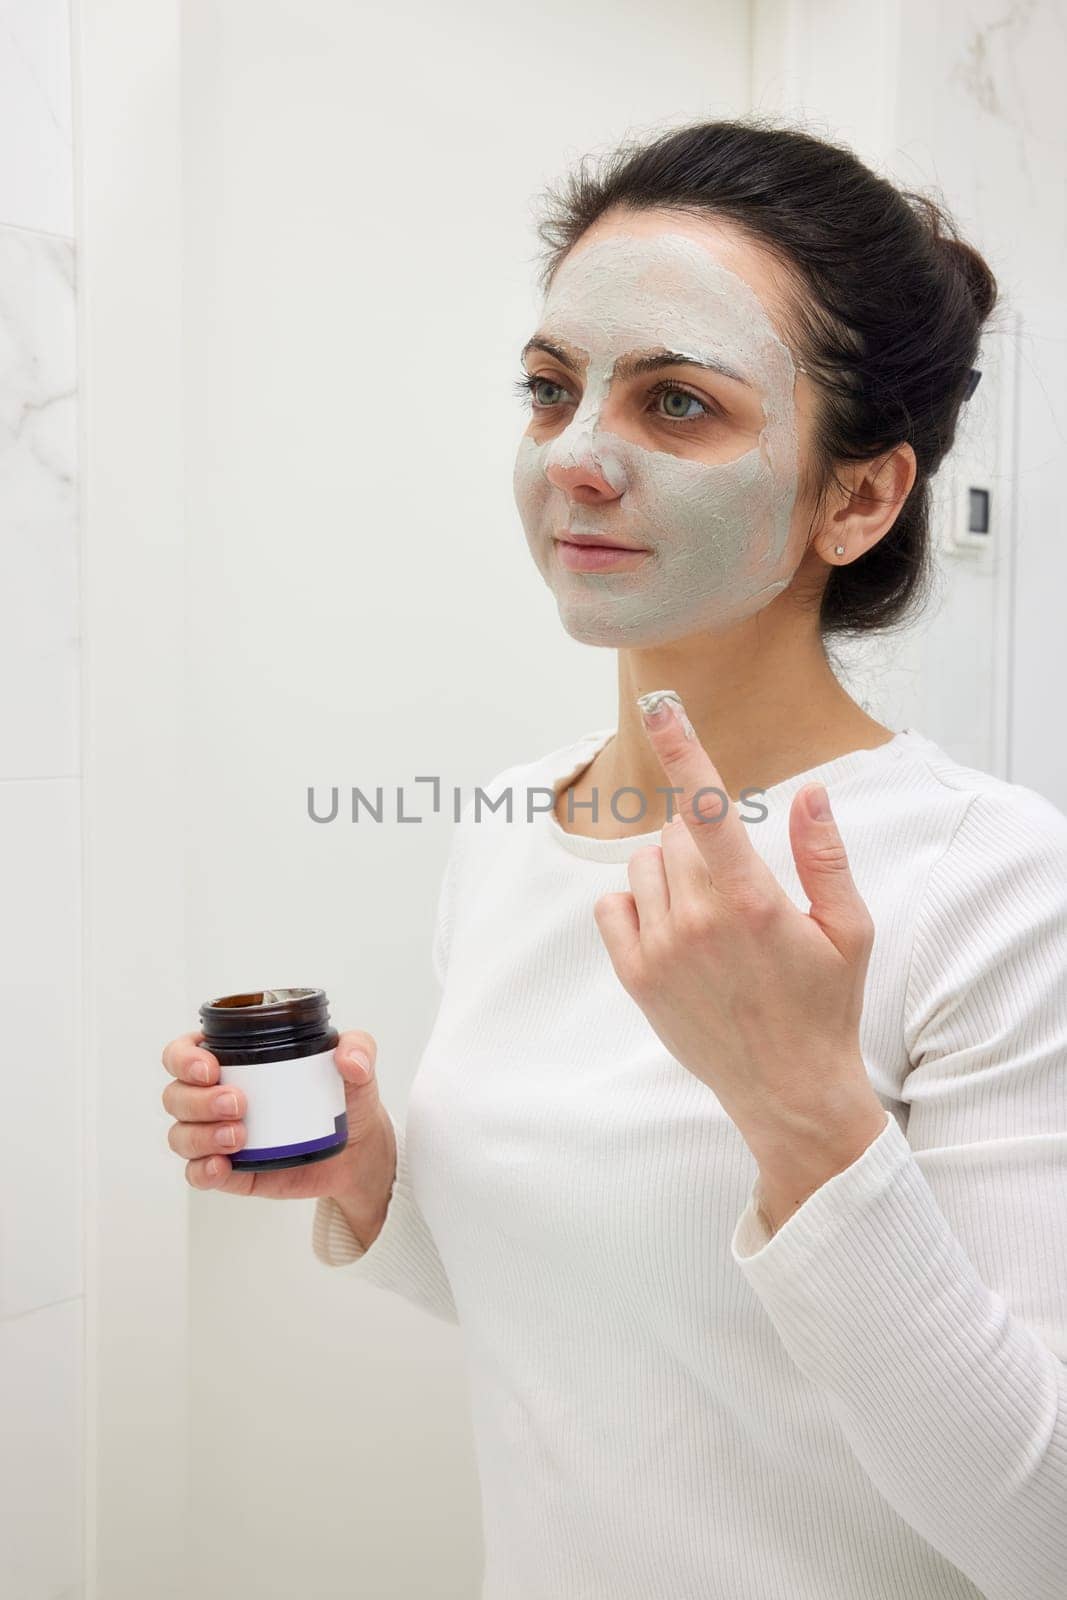 Caucasian woman looking in mirror and applying face mask by erstudio